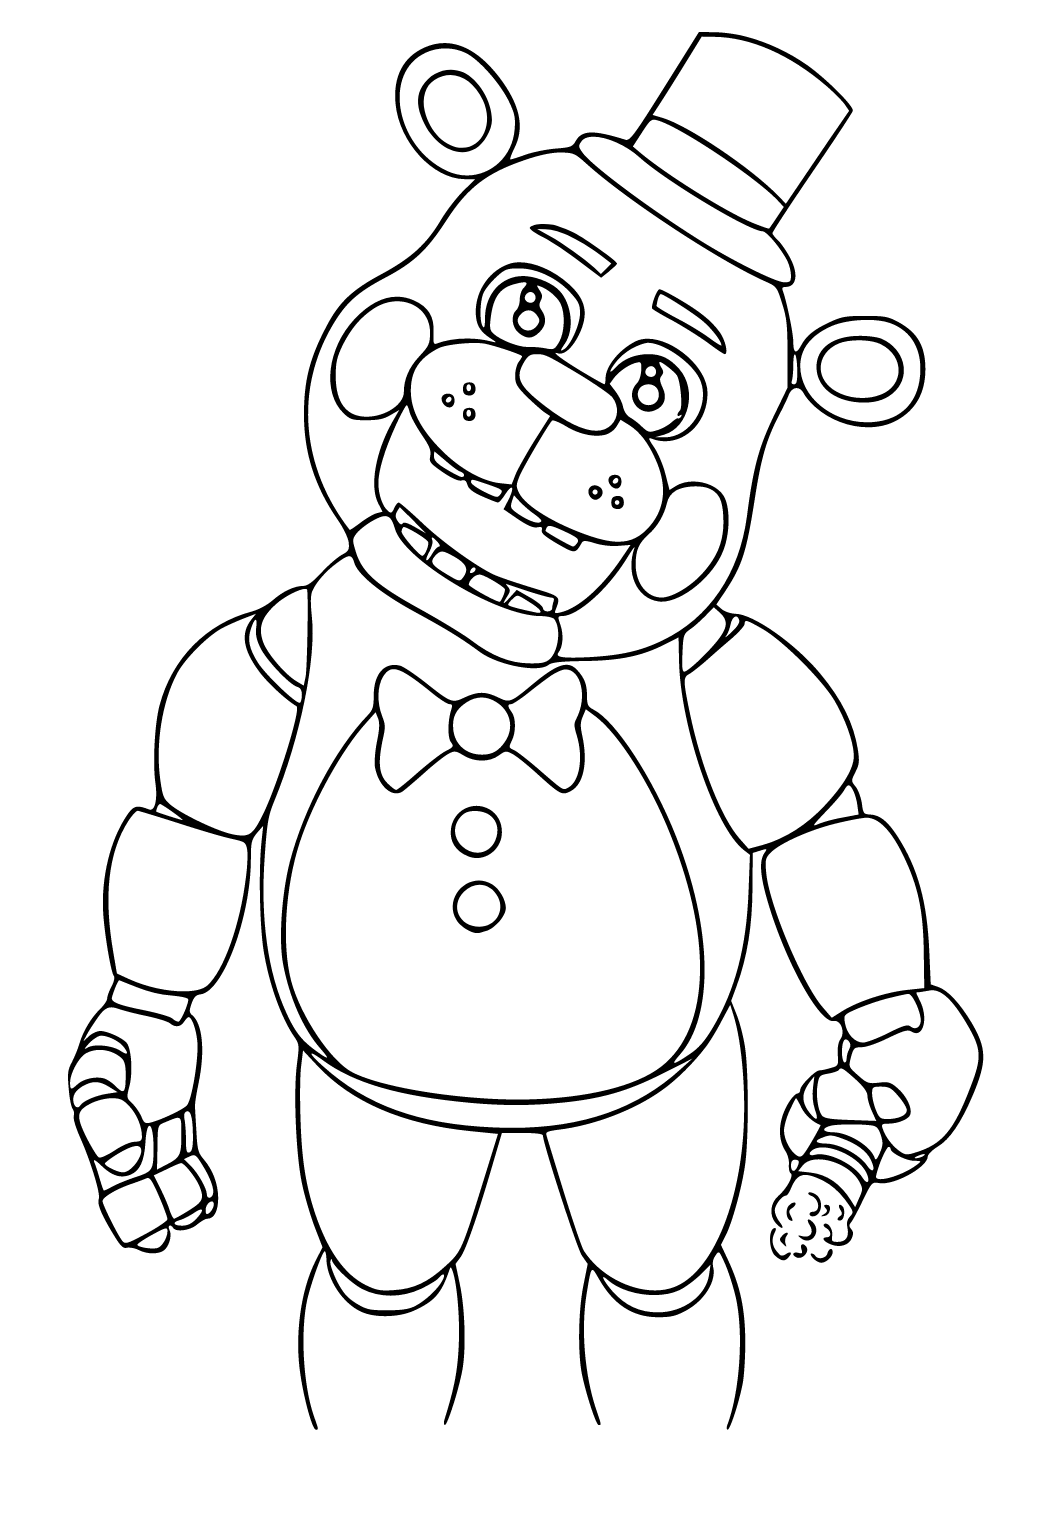 Freddy Fazbear Coloring Page  Fnaf coloring pages, Bear coloring